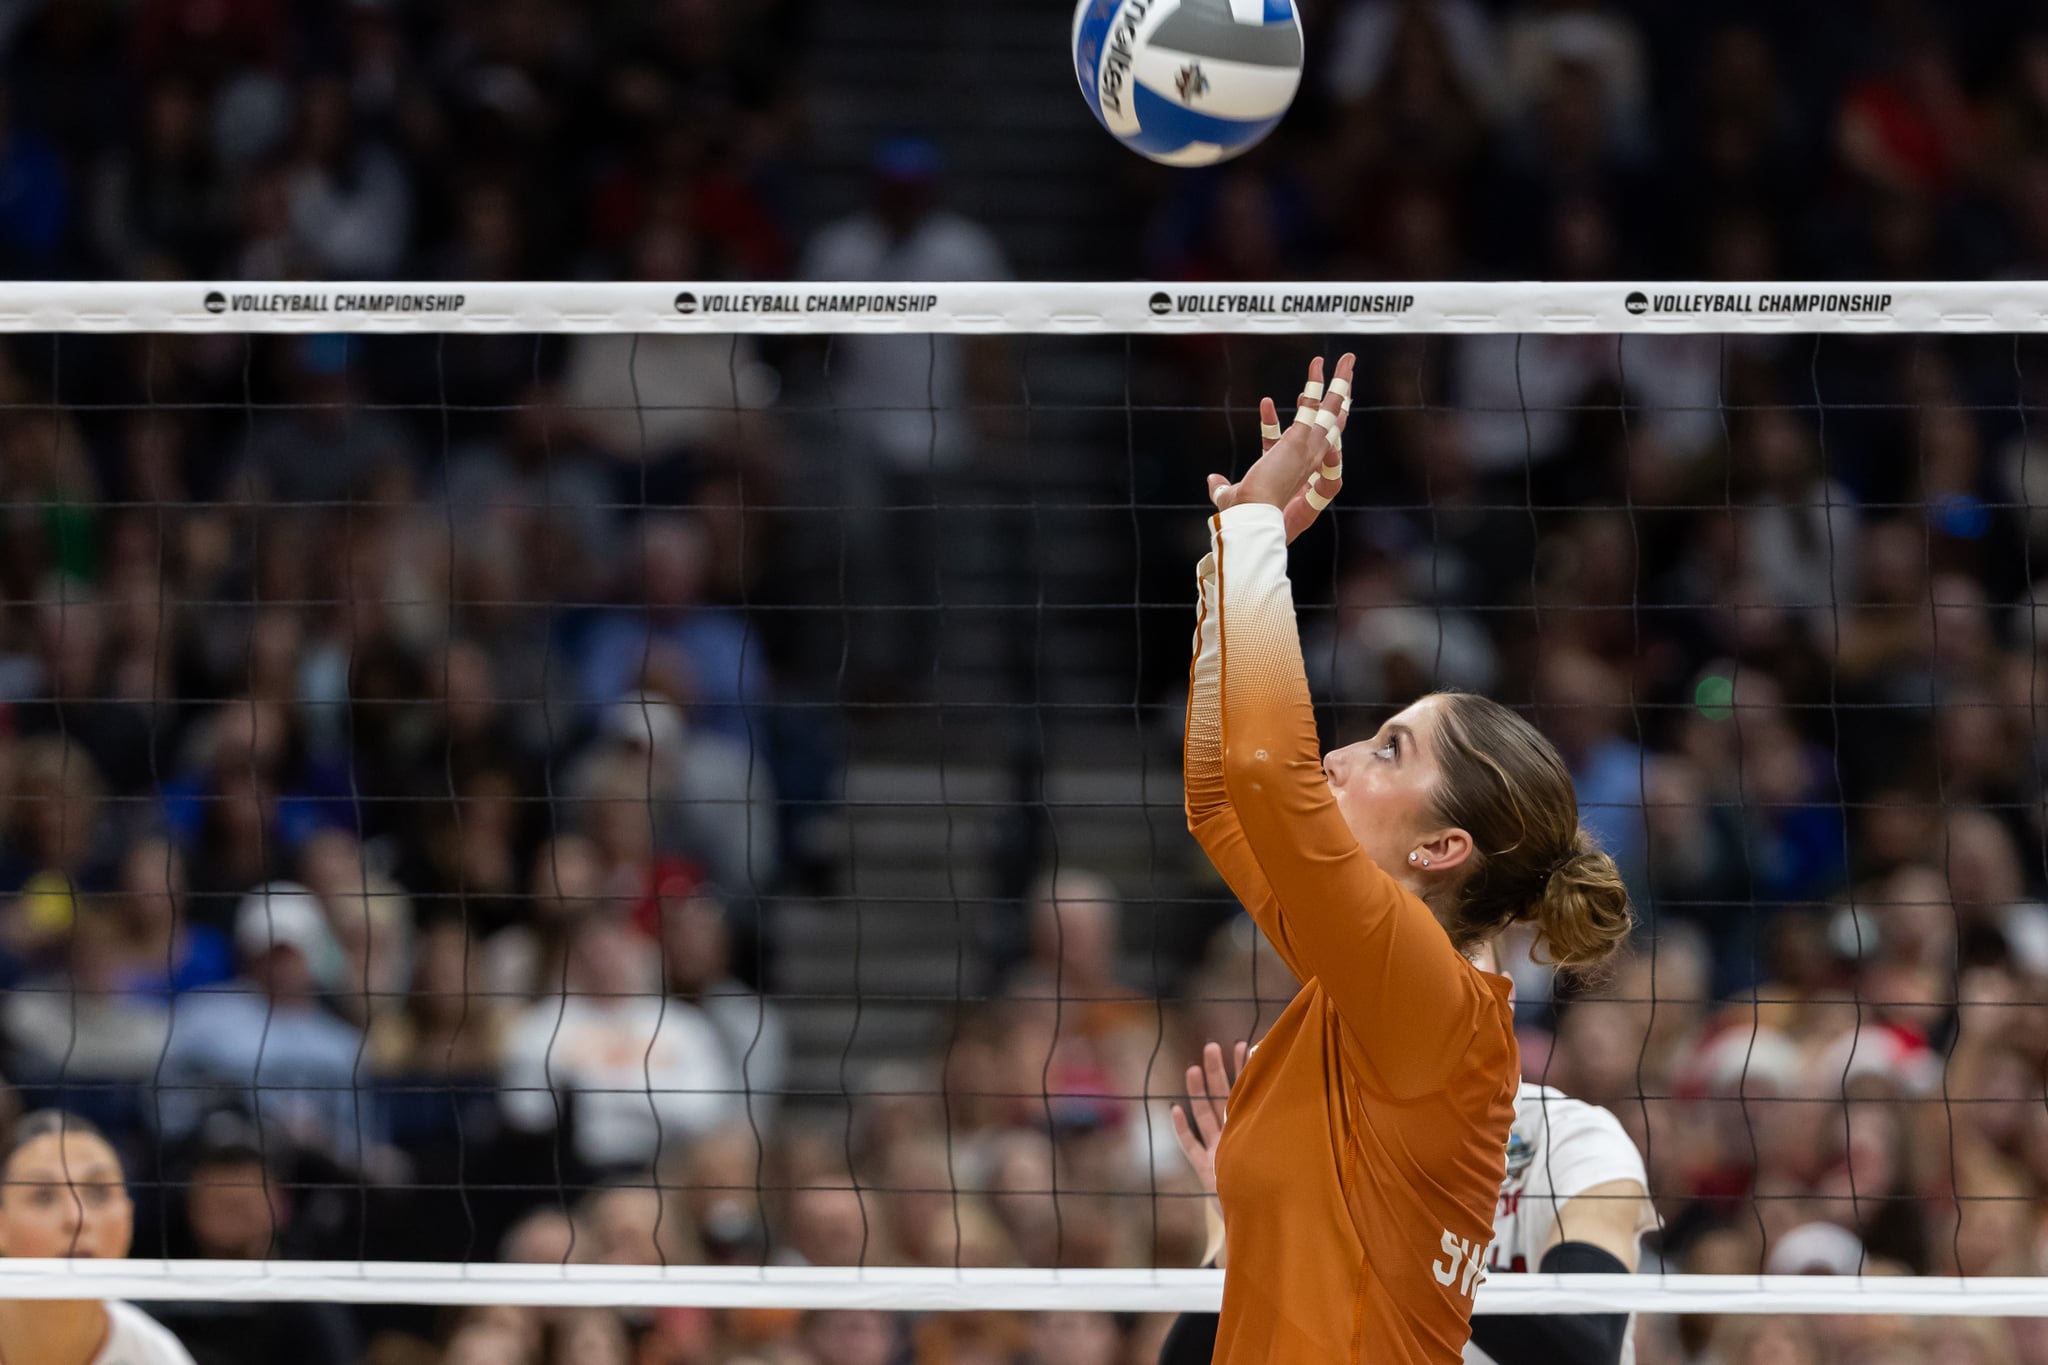 TAMPA, FL - DECEMBER 17: Texas setter Ella Swindle (1) watches the ball as it approaches her hands for a set during the NCAA Division I Women's Volleyball Championship match between Texas Longhorns and Nebraska Cornhuskers on December 17, 2023, at Amalie Arena in Tampa, Florida.  (Photo by David Buono/Icon Sportswire via Getty Images)